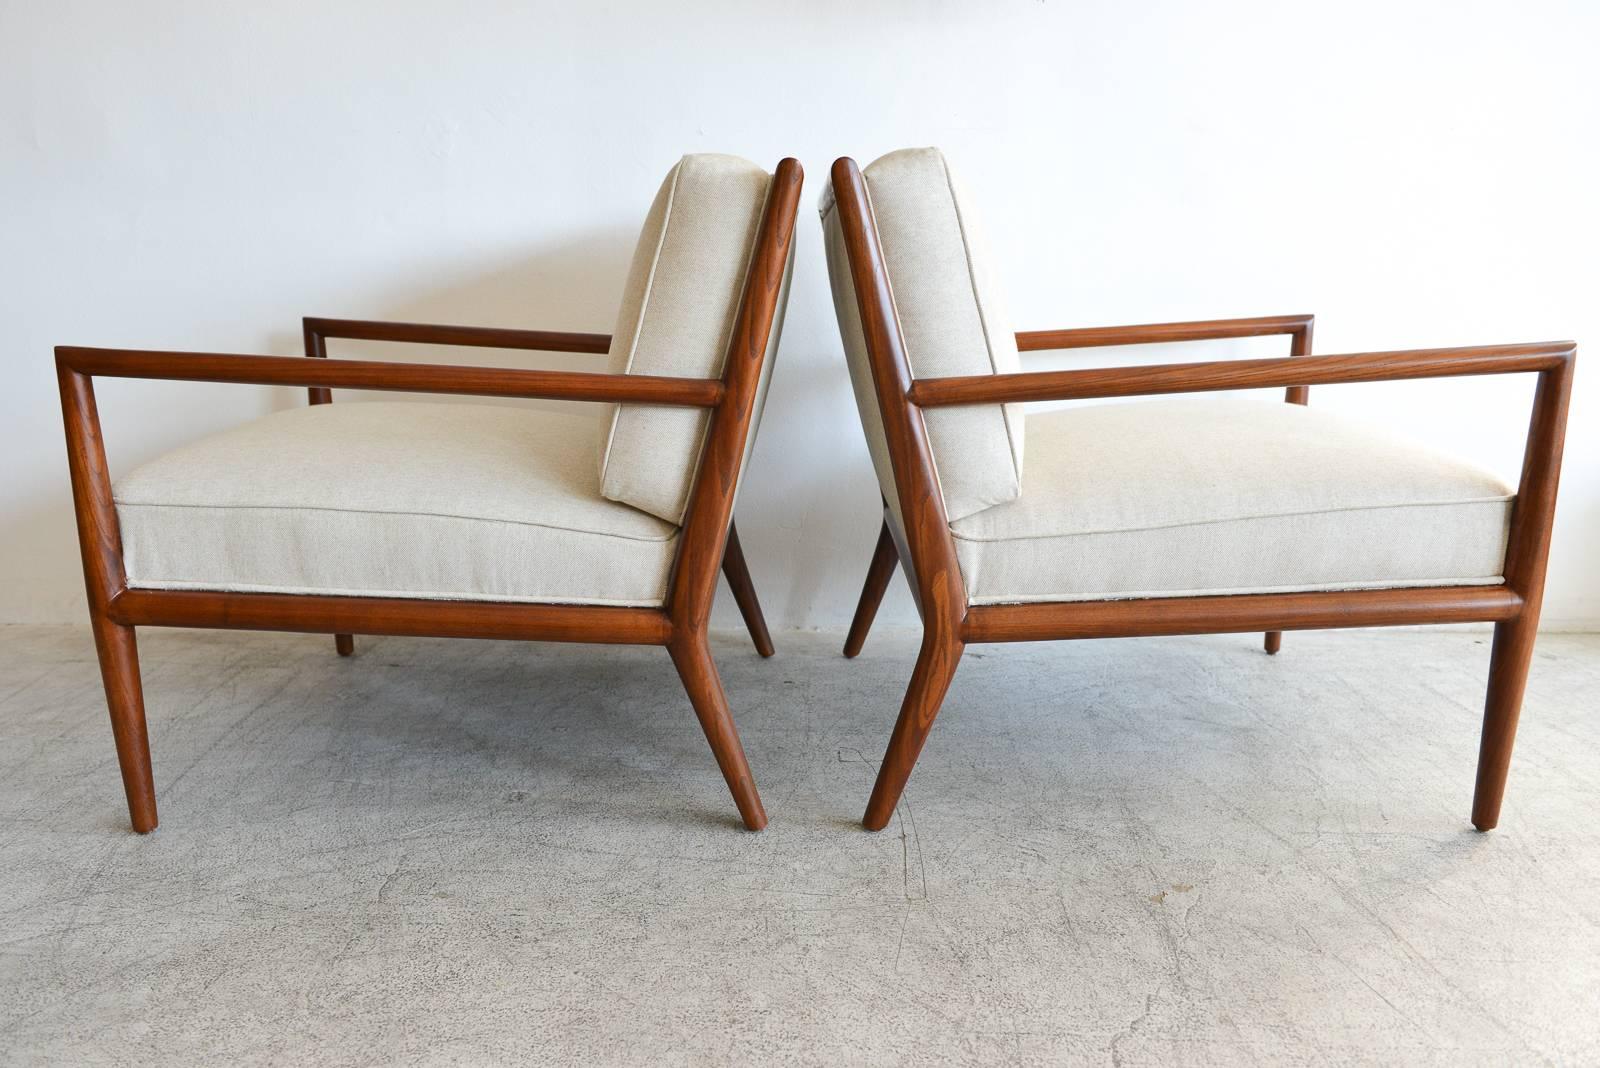 Pair of T.H. Robsjohn-Gibbings walnut frame lounge chairs, circa 1959. Professionally restored in beautiful natural linen with new foam. Professionally restored walnut frames. Showroom condition. Classic lines, timeless design.

Available to see in